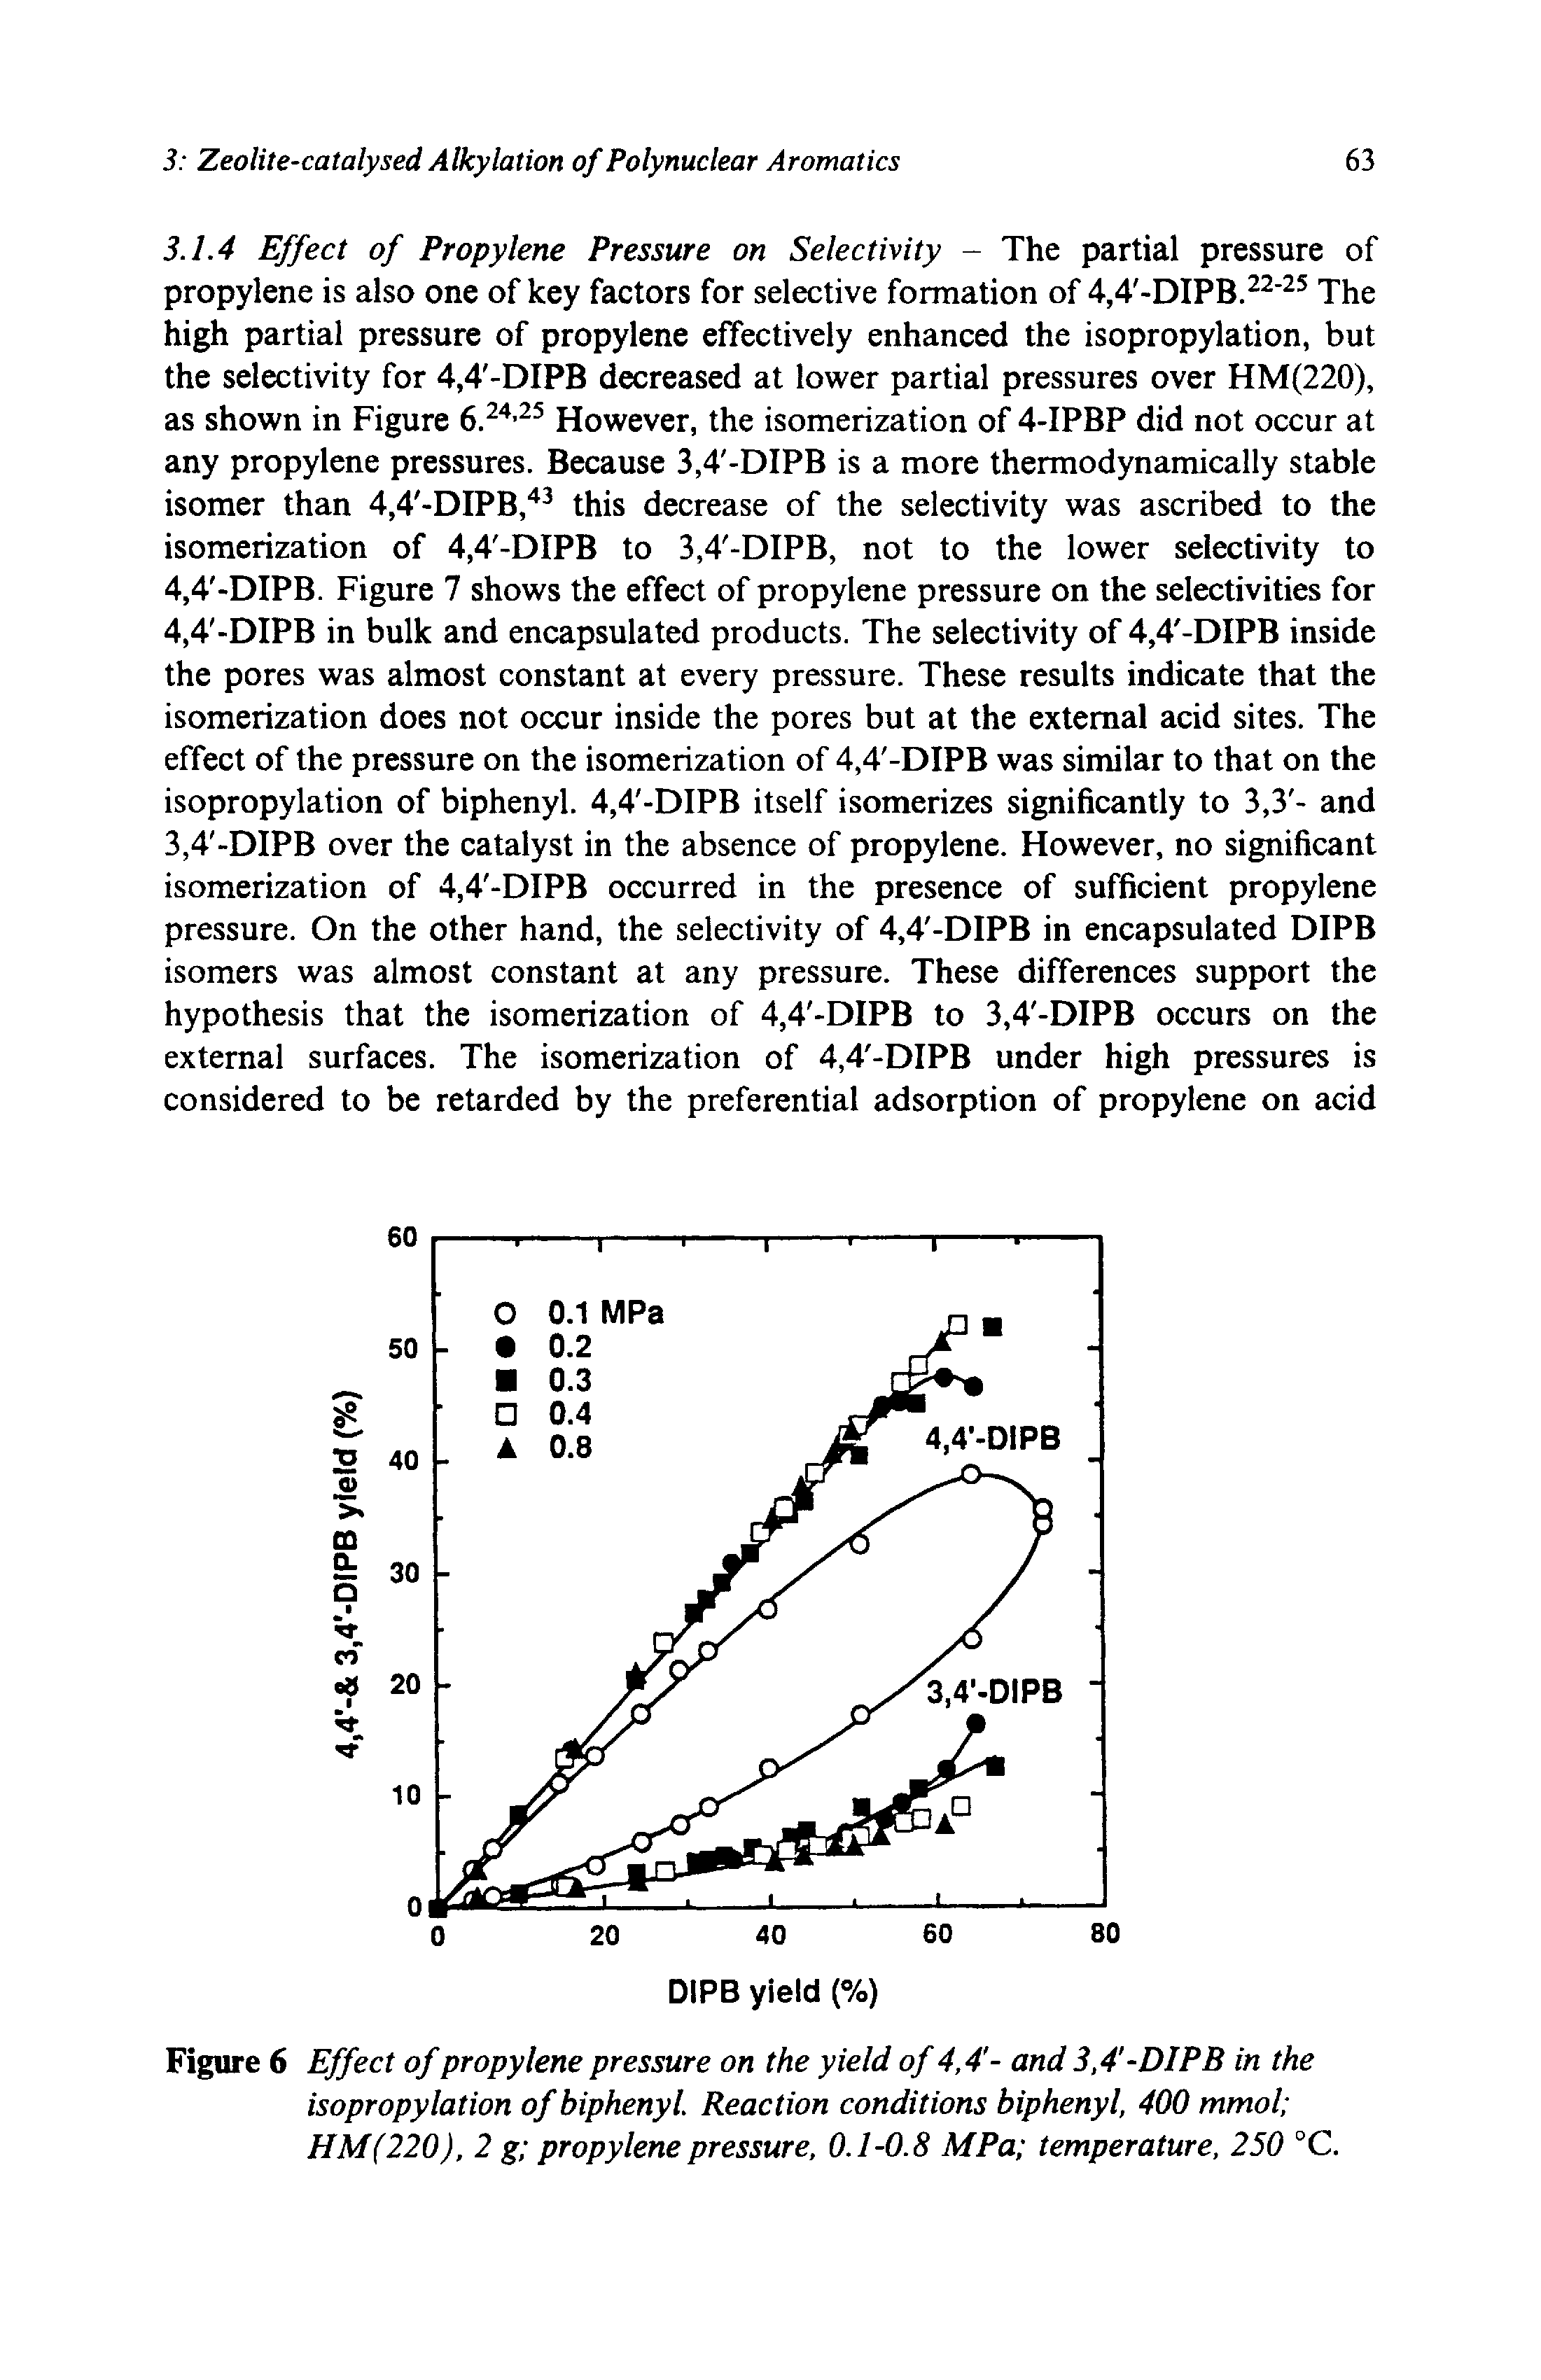 Figure 6 Effect of propylene pressure on the yield of 4,4 - and 3,4 -DIPB in the isopropylation of biphenyl. Reaction conditions biphenyl, 400 mmol HM(220), 2 g propylene pressure, 0.1-0.8 MPa temperature, 250 °C.